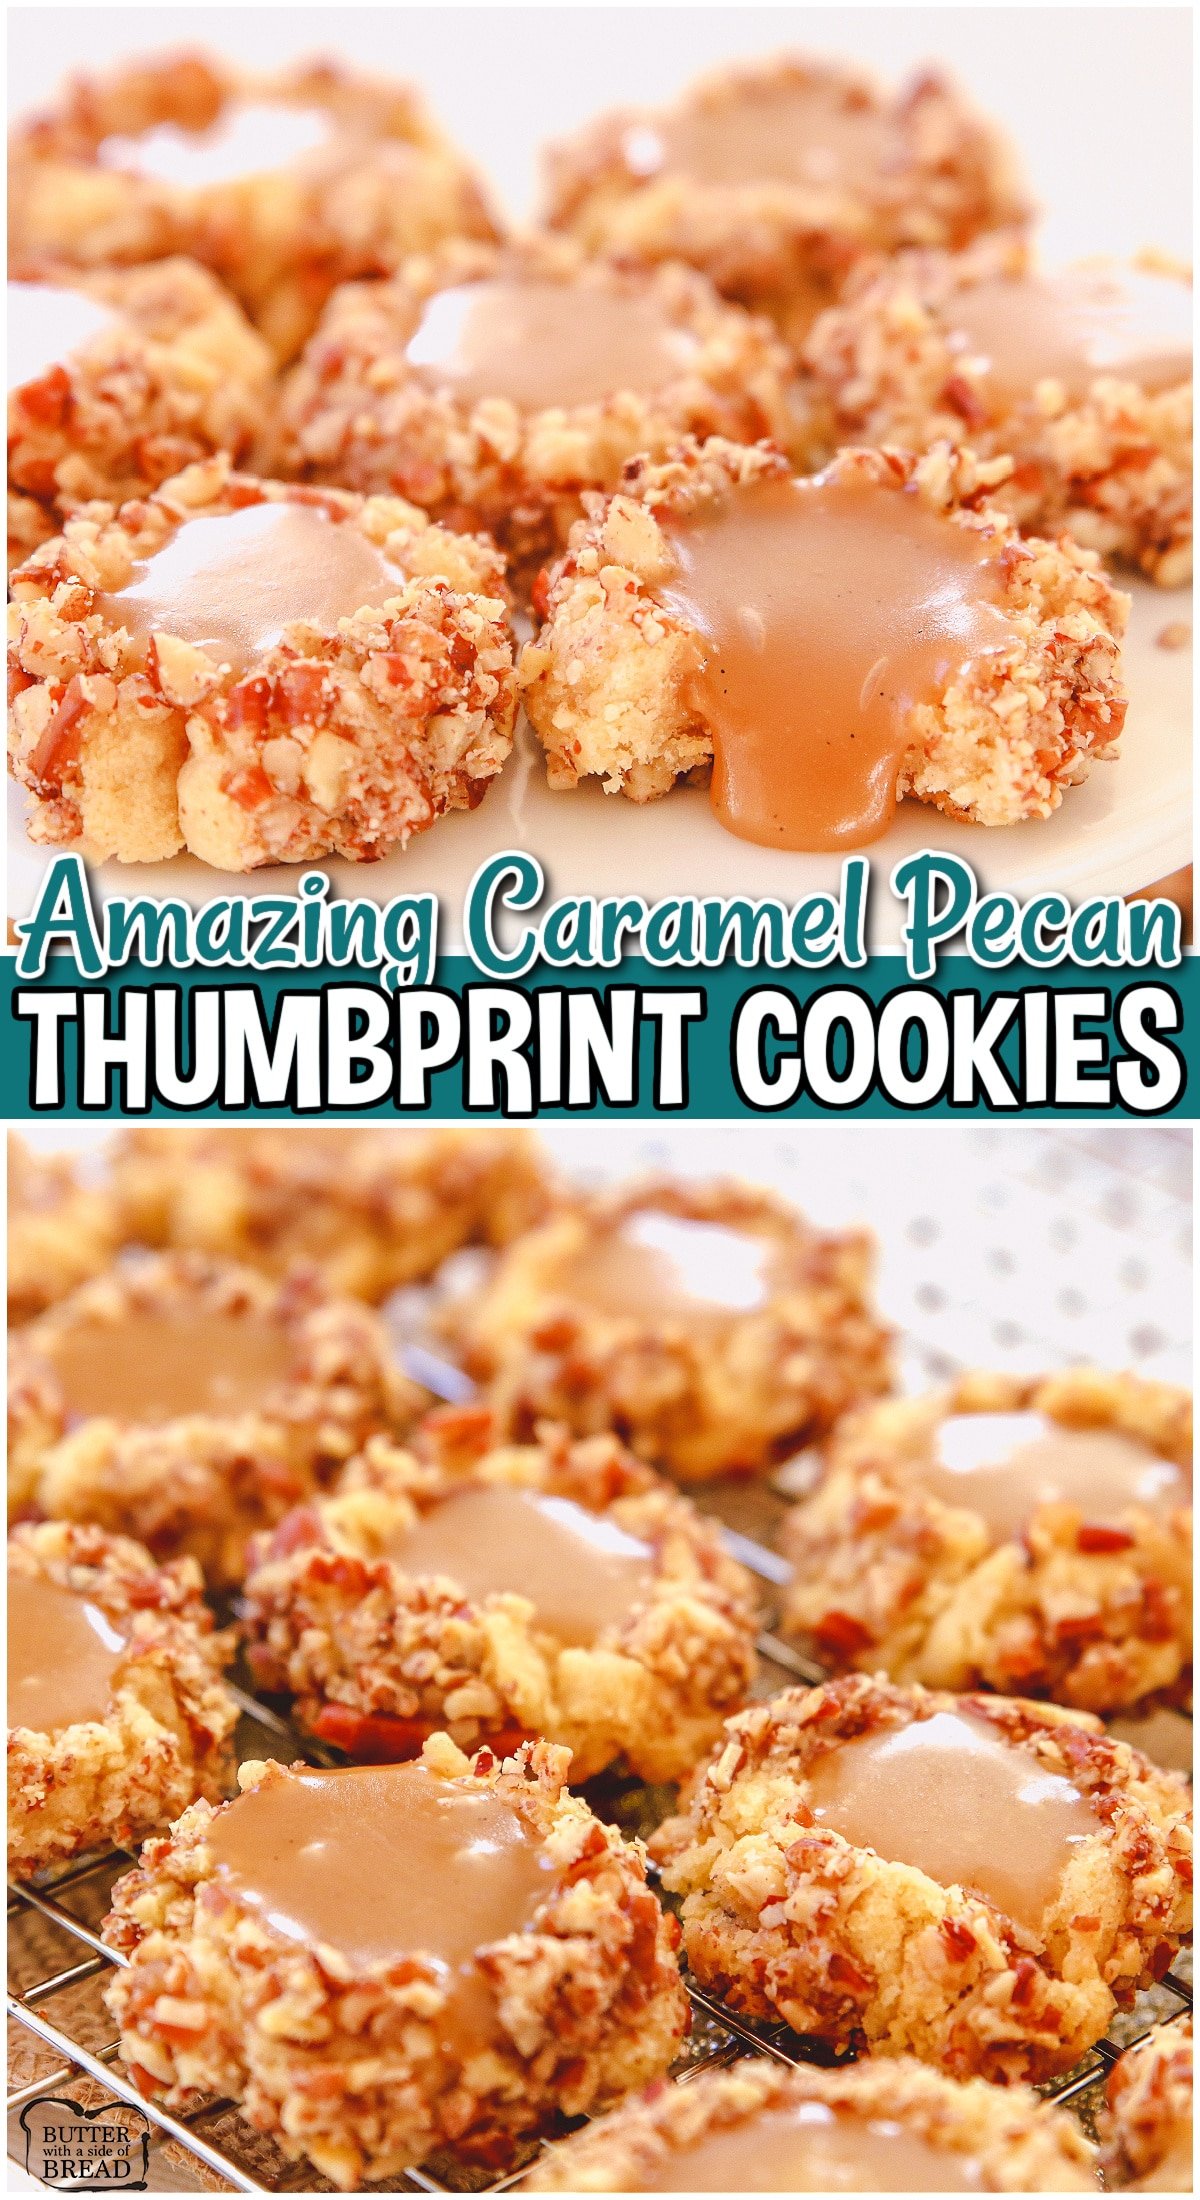 Caramel Pecan Thumbprint Cookies are buttery cookies rolled in chopped pecans, baked then filled with warm caramel! Gooey caramel thumbprint cookies perfect for holiday dessert trays!